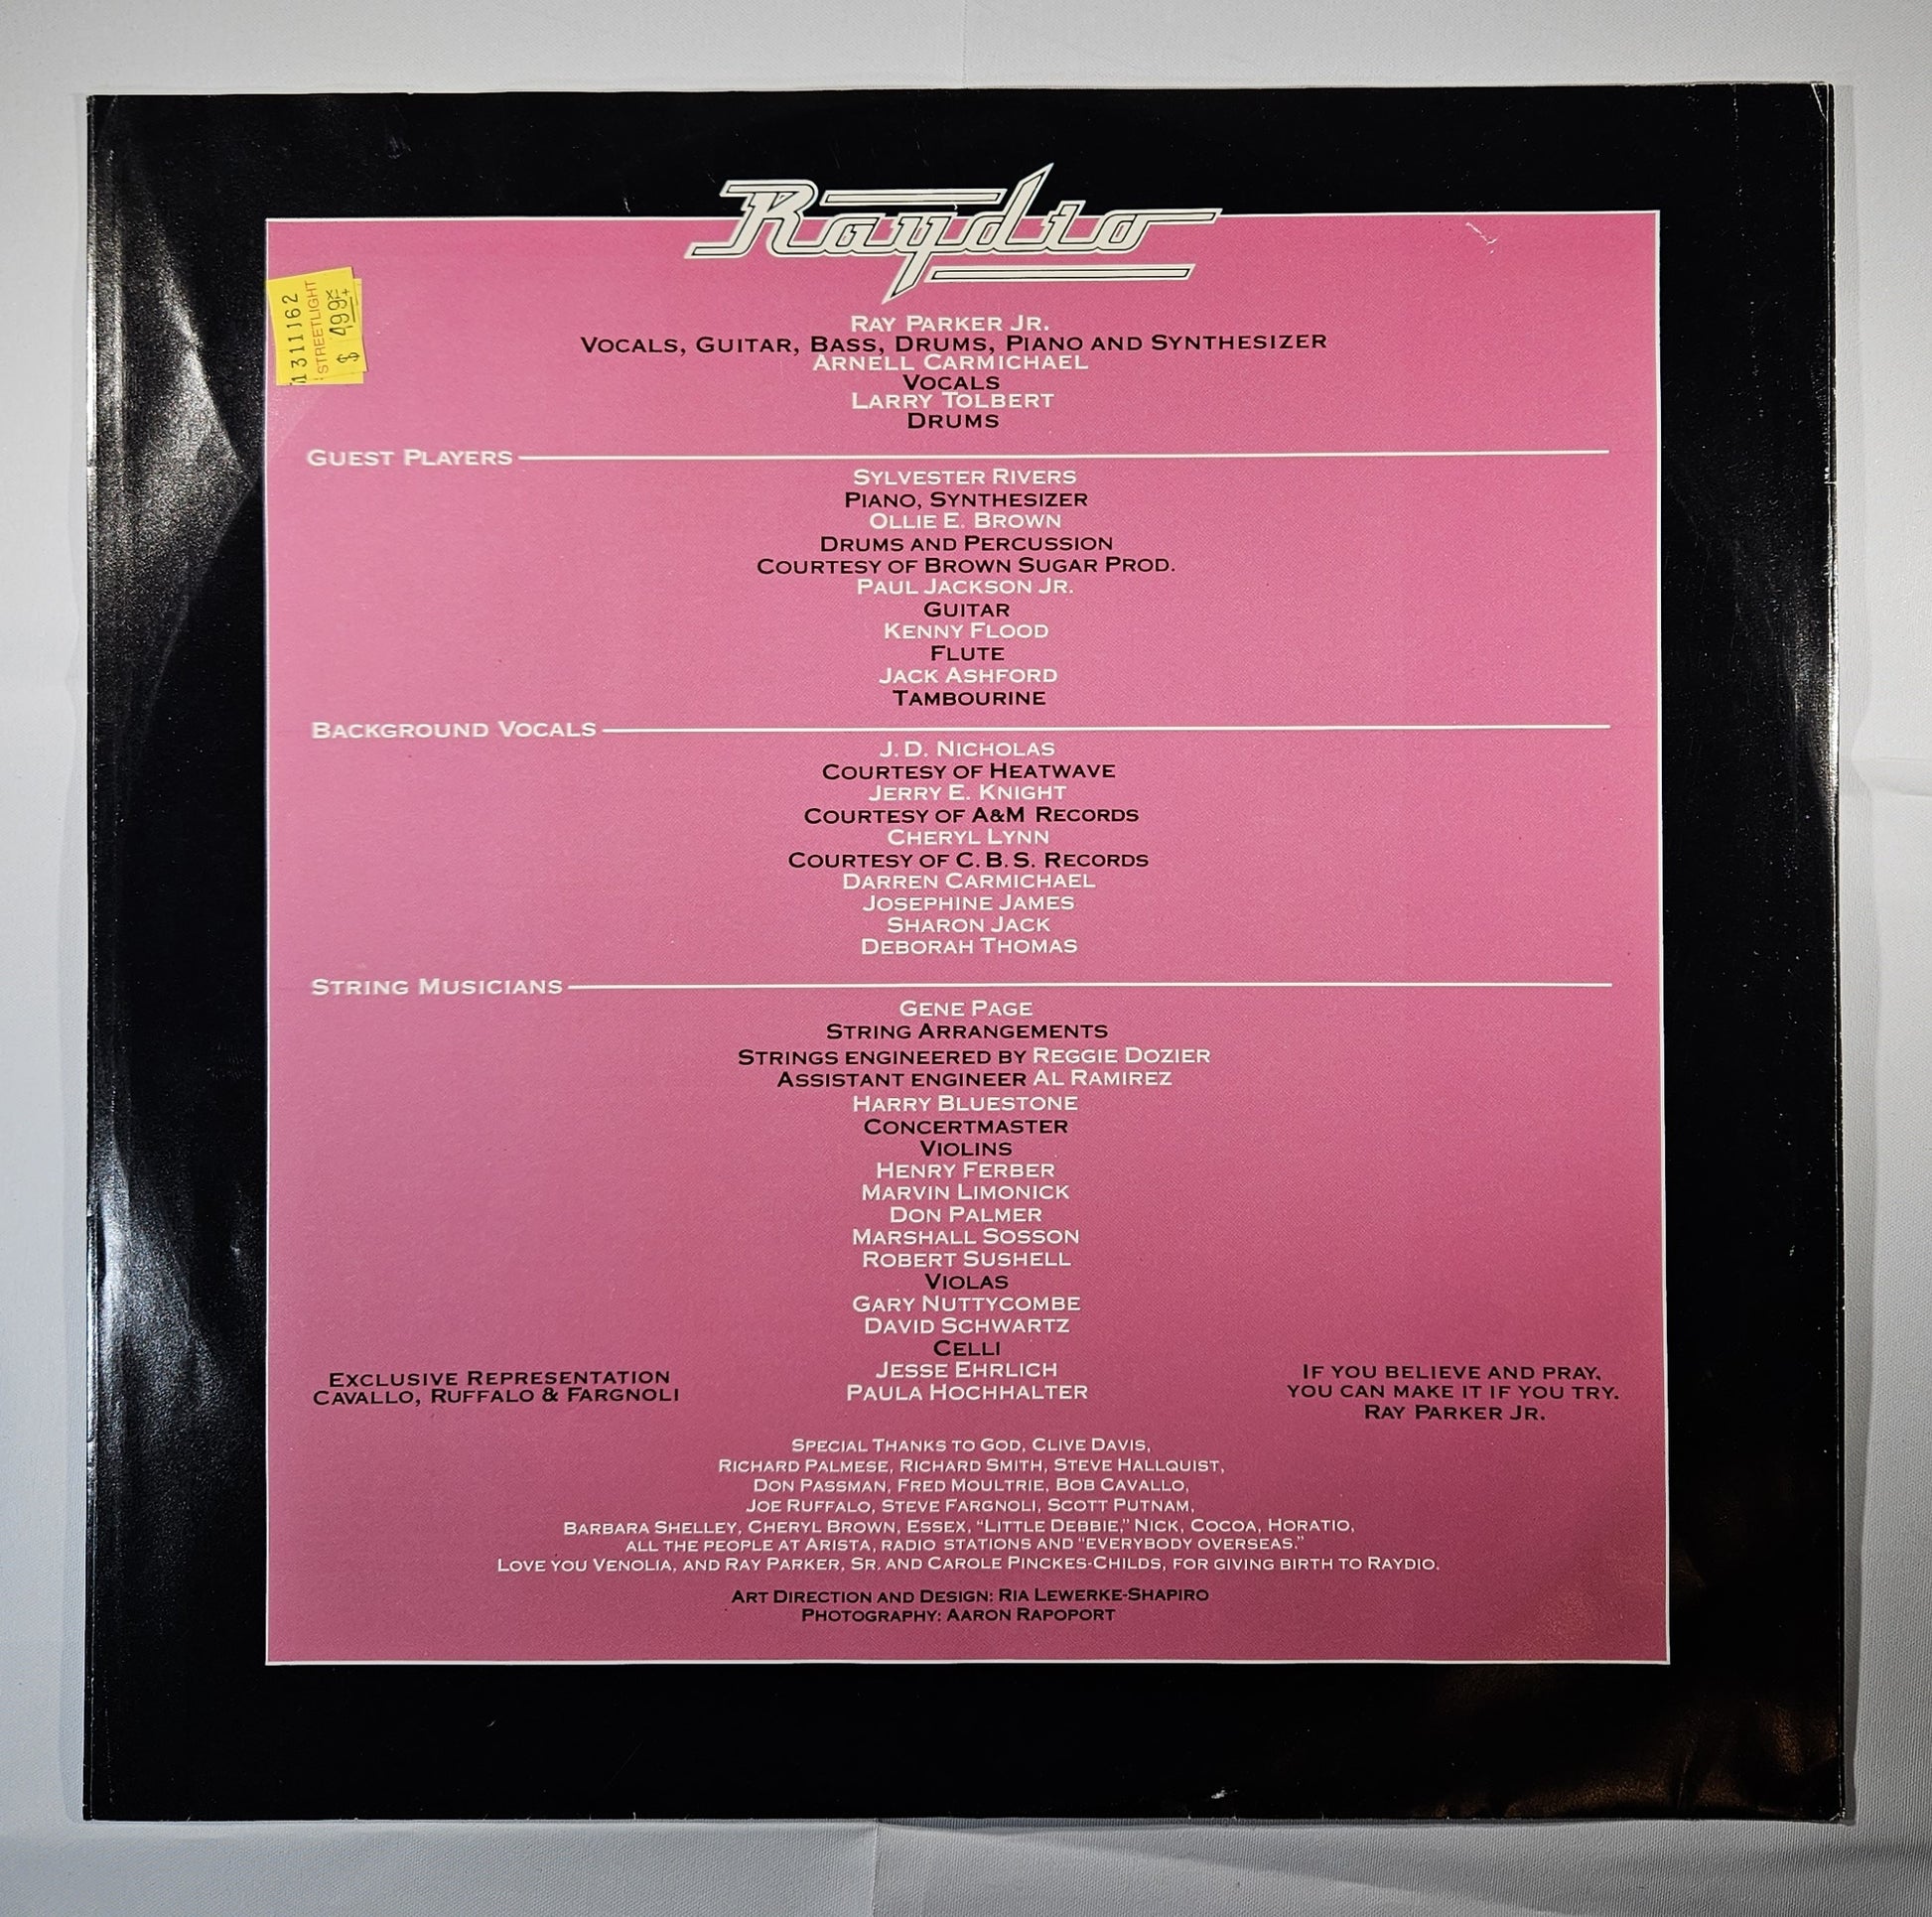 Ray Parker Jr. & Raydio - A Woman Needs Love [1981 Used Vinyl Record LP] [B]